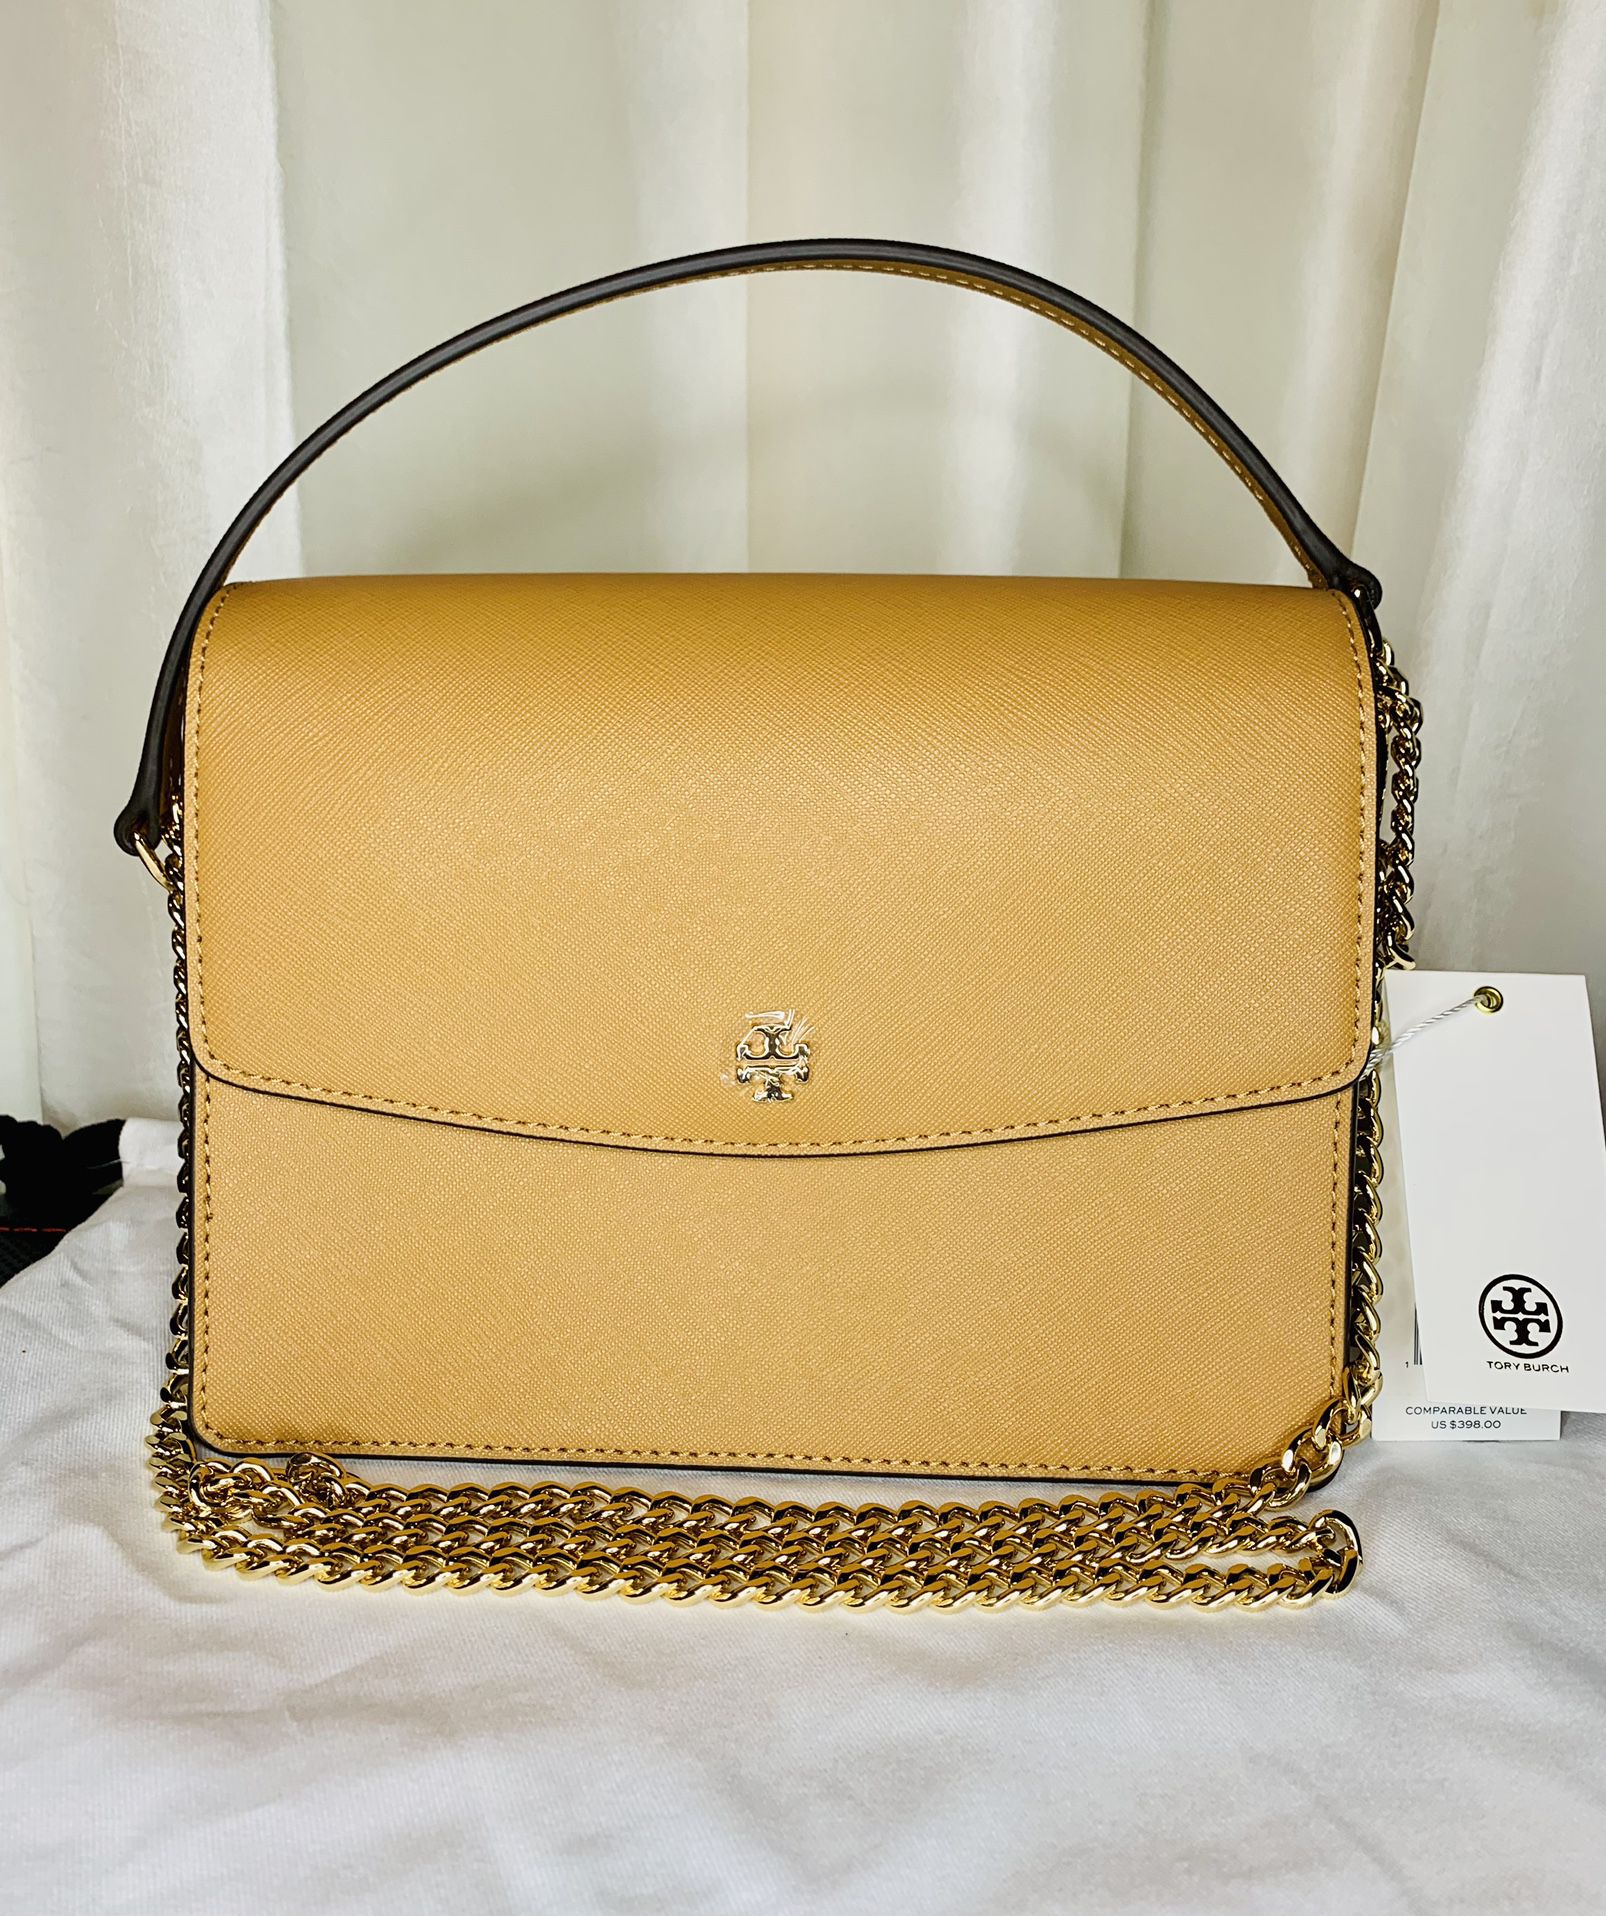 Tory Burch Emerson Combo Navy Saffiano Leather Cross Body Bag AED 899 Free  Delivery across UAE 